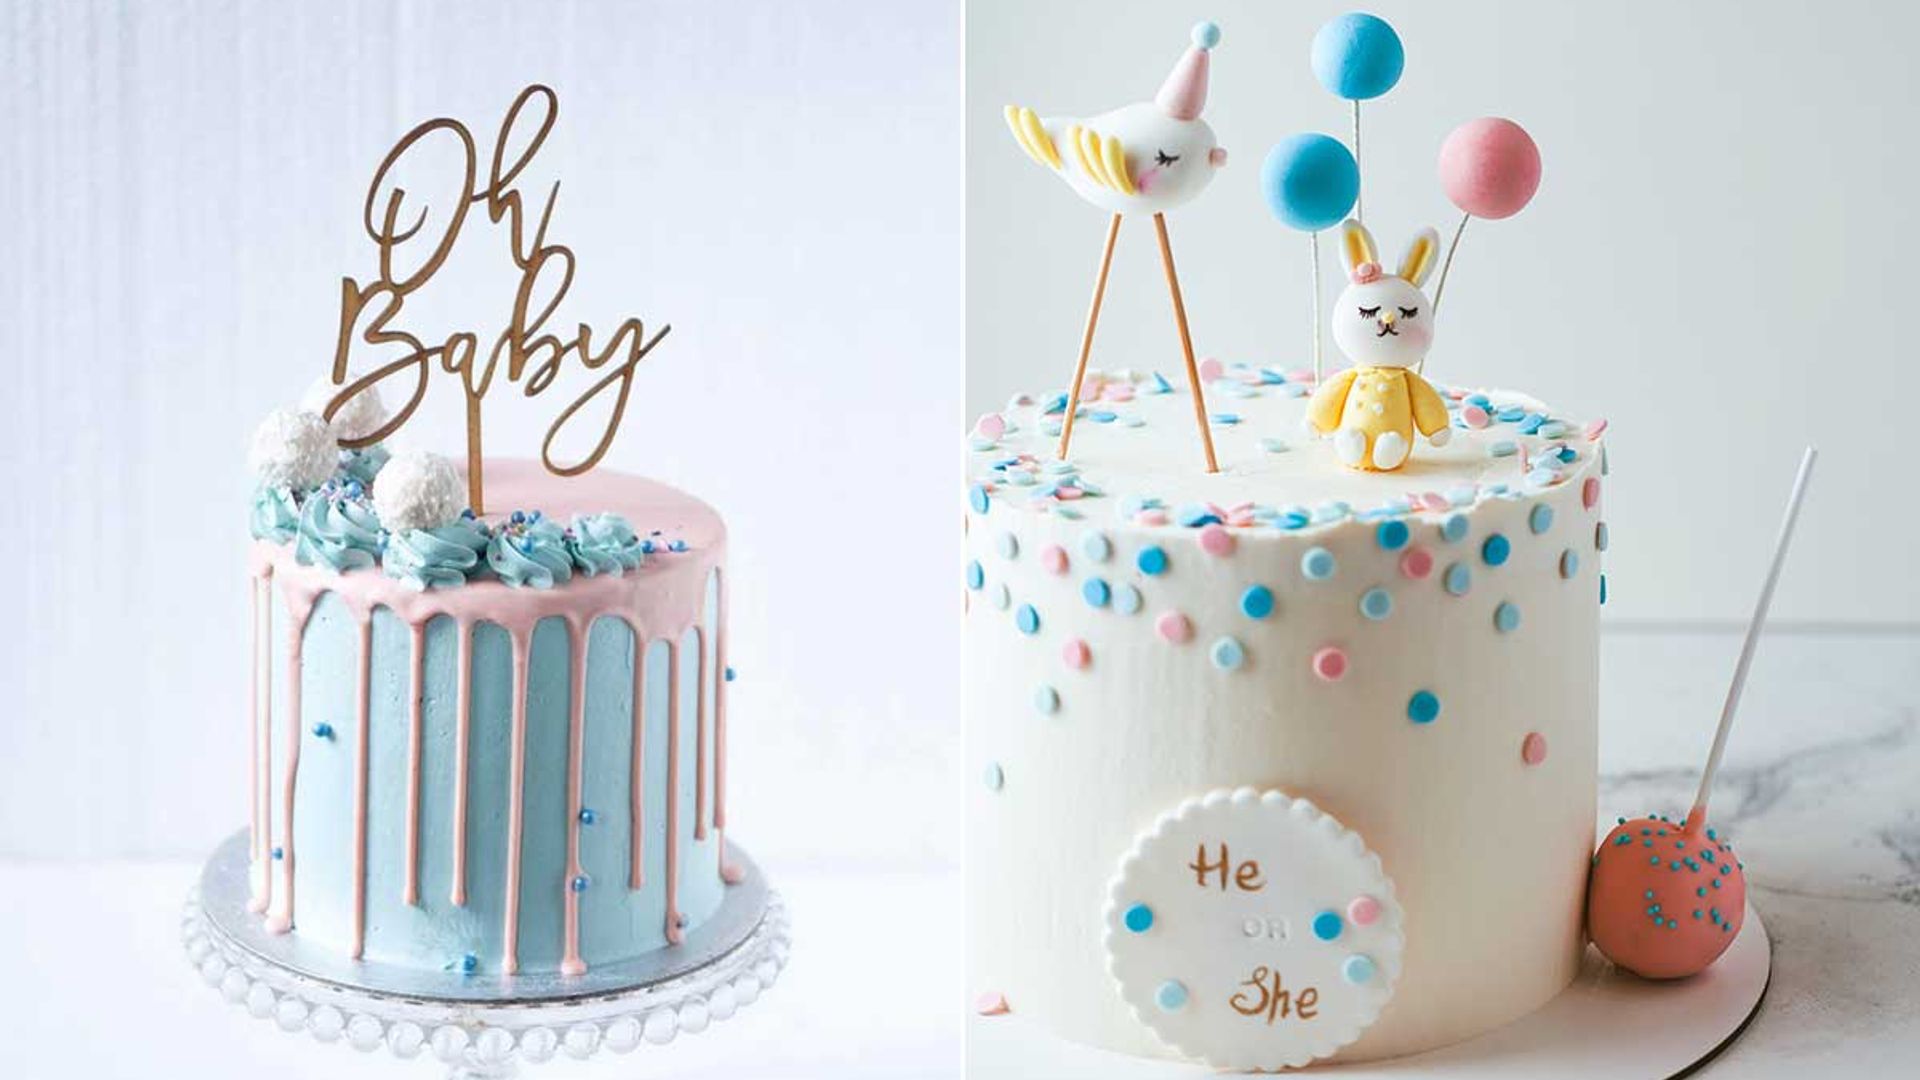 Baby shower cakes you'll want to recreate – from teddy bears to trains